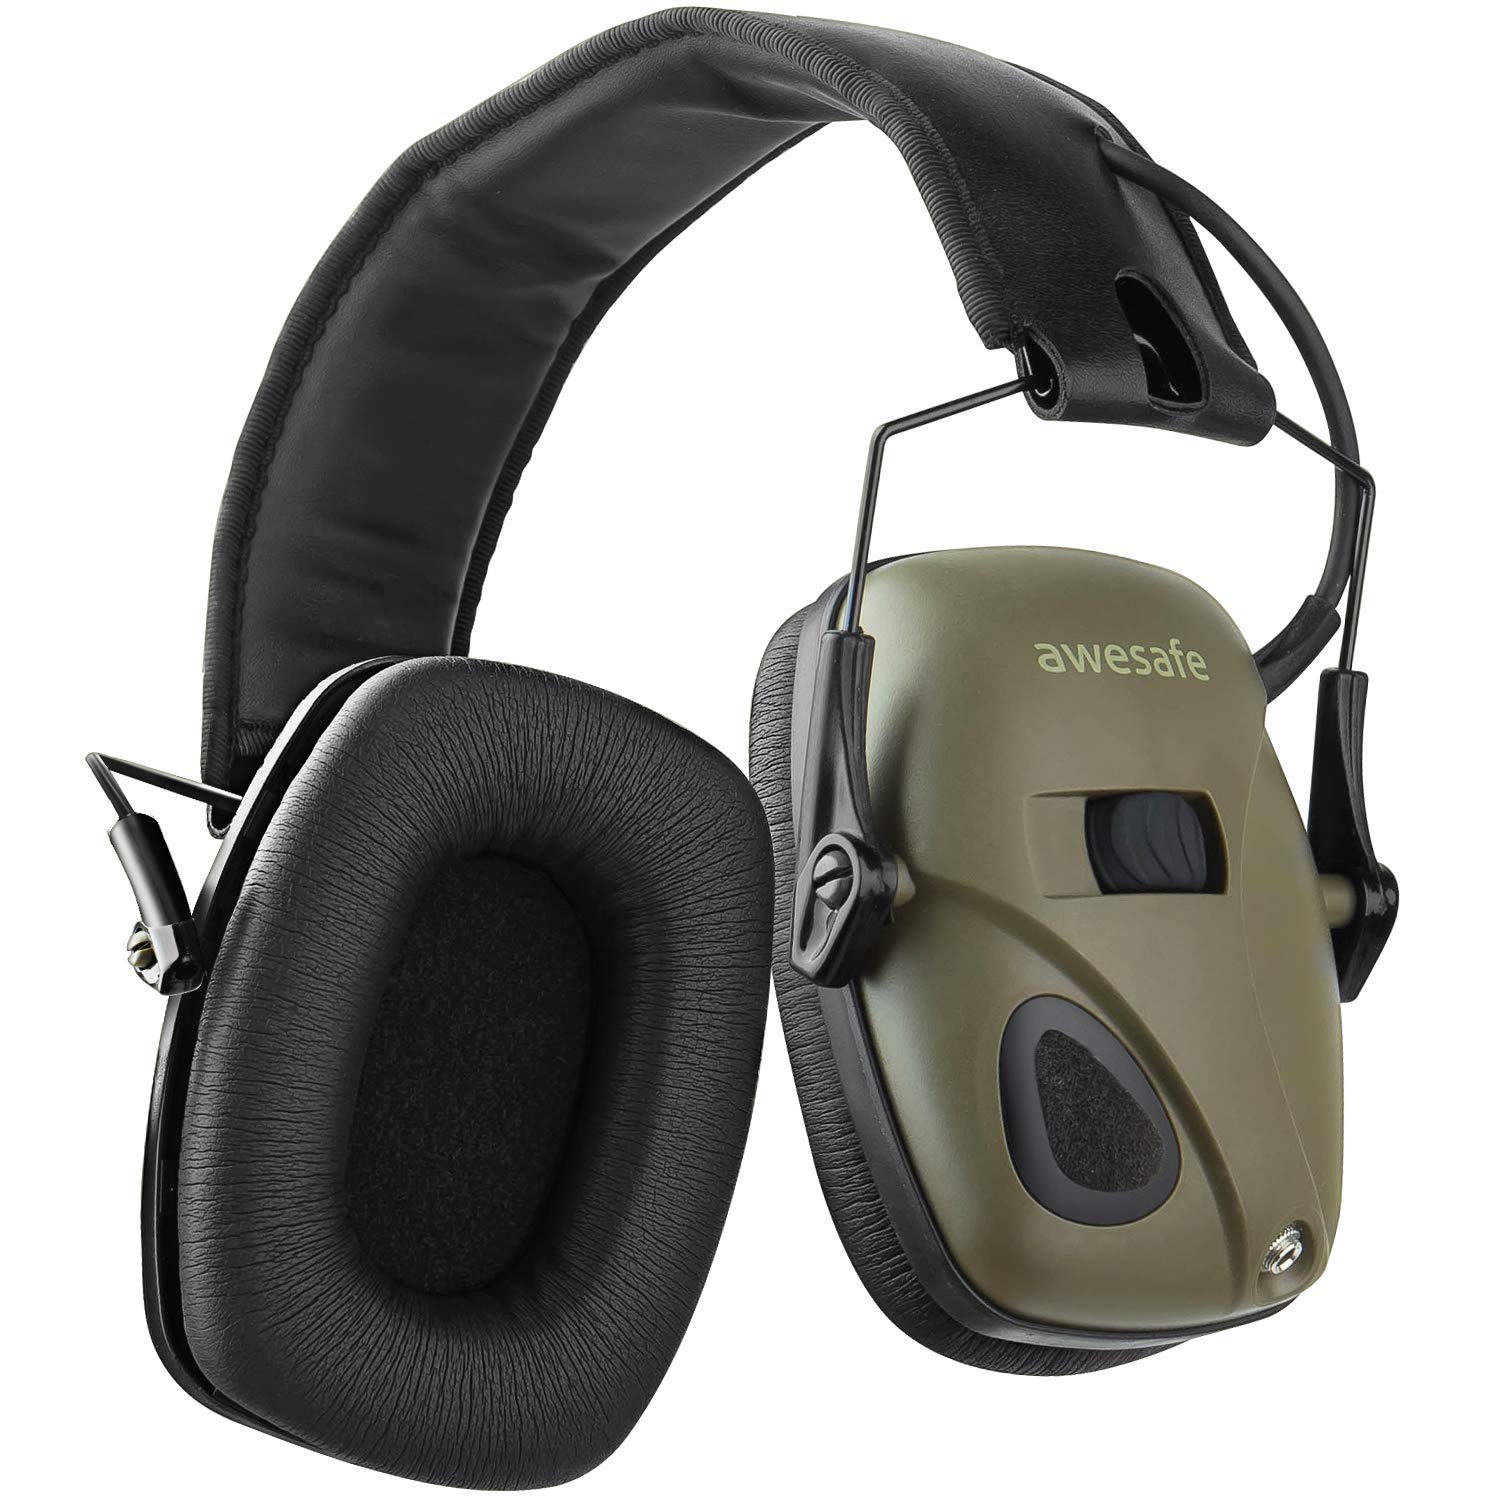 13 Unbelievable Electronic Ear Muffs For Shooting for 2023